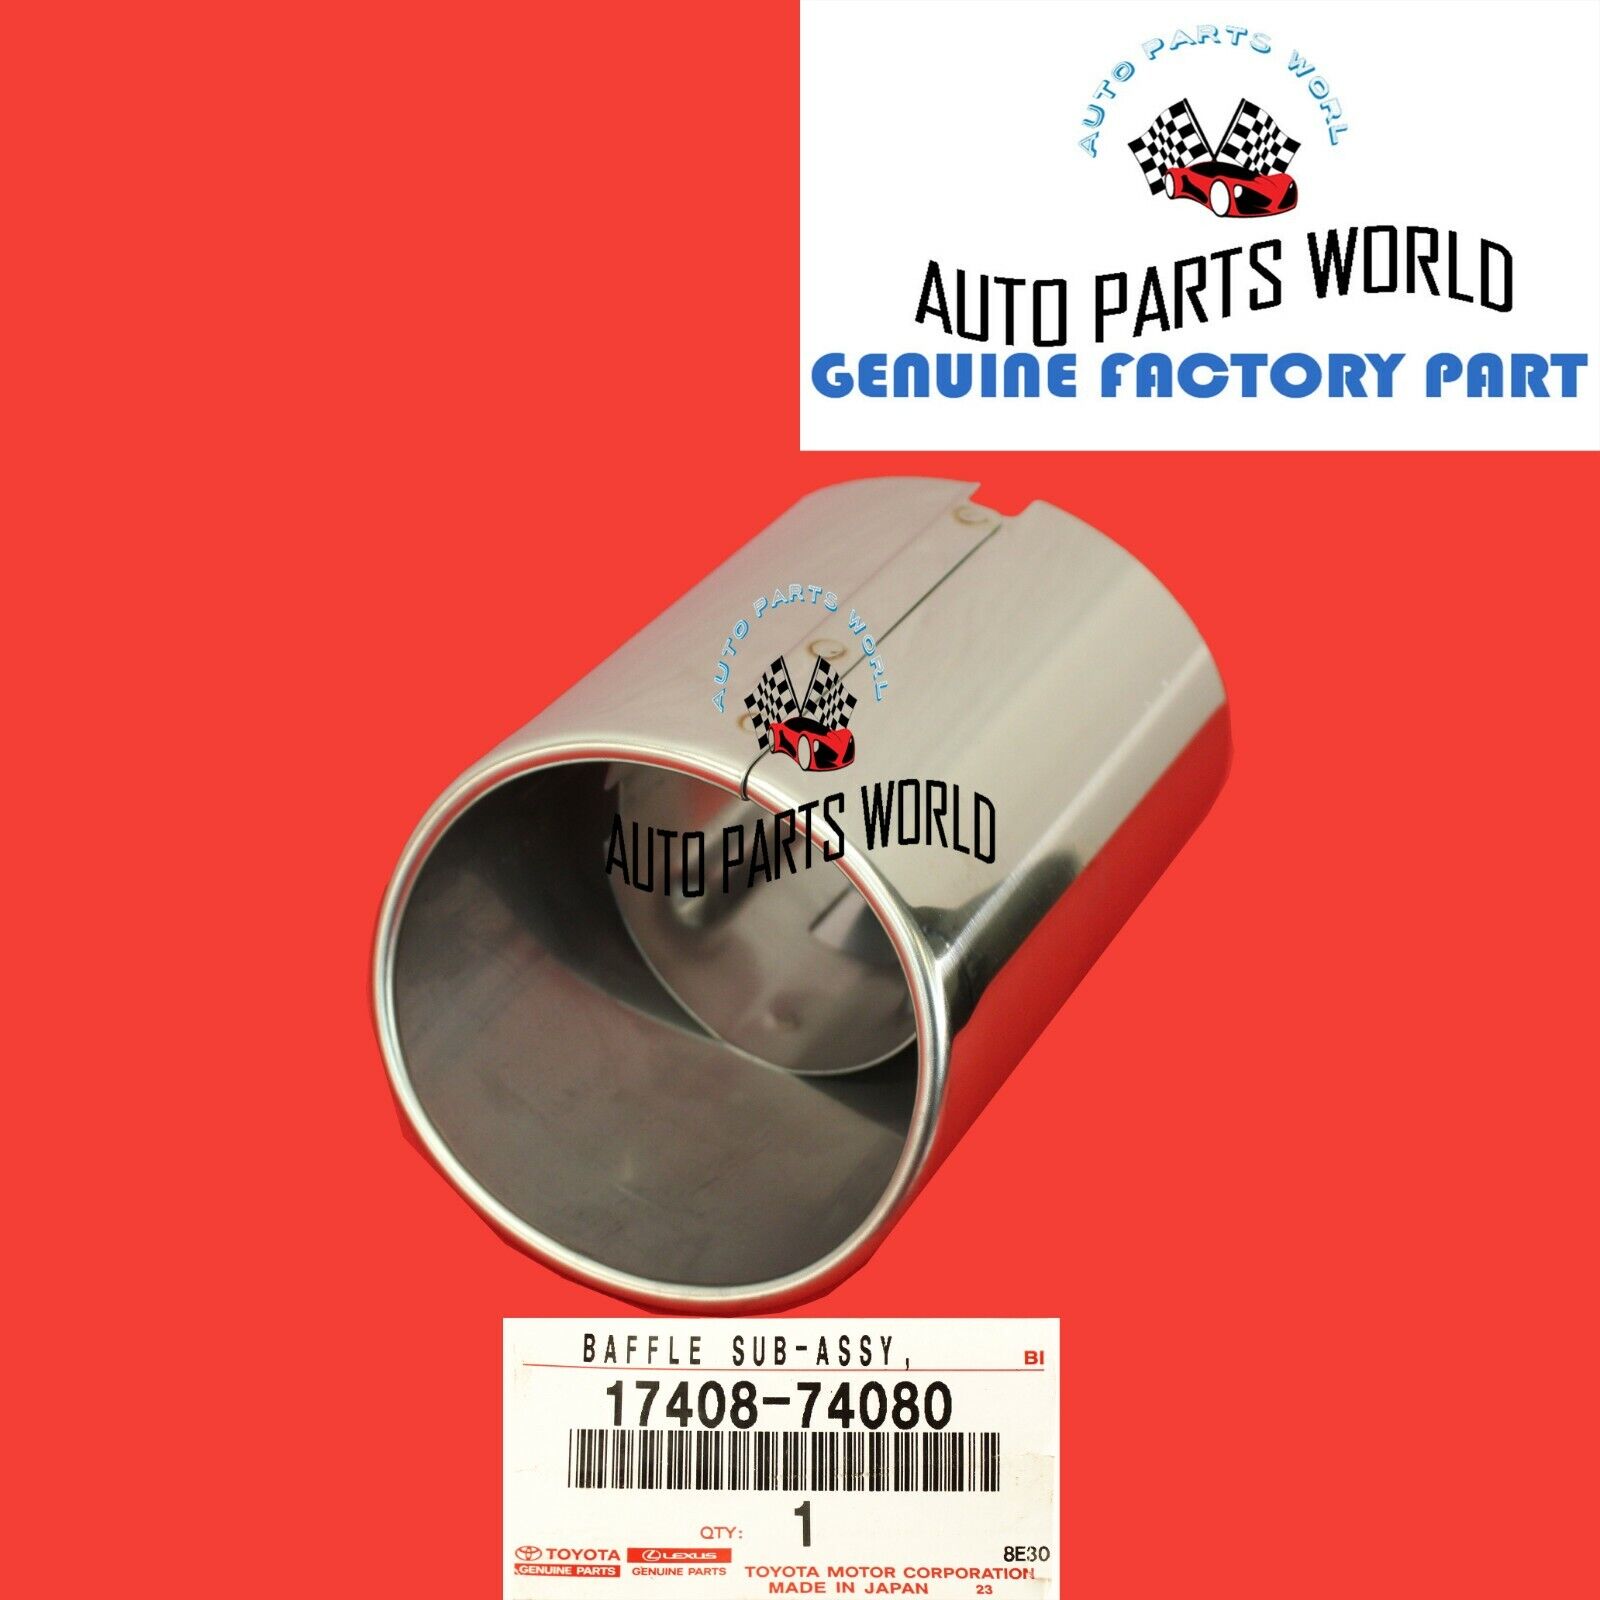 GENUINE TOYOTA AVALON CAMRY LS430 GS430 GS460 EXHAUST TAILPIPE TIP 17408-74080